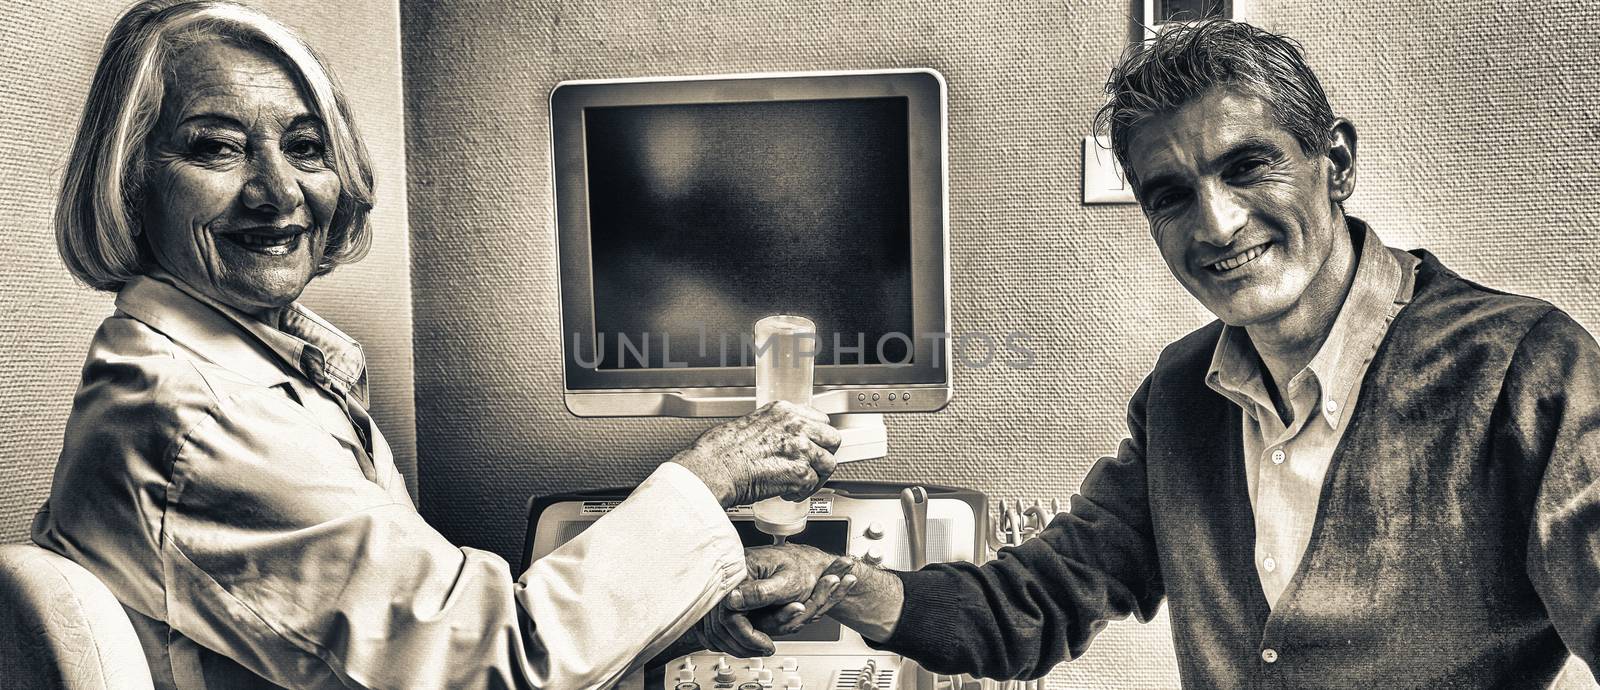 Mature female doctor examining man in 40s. Wrist and arm scan.